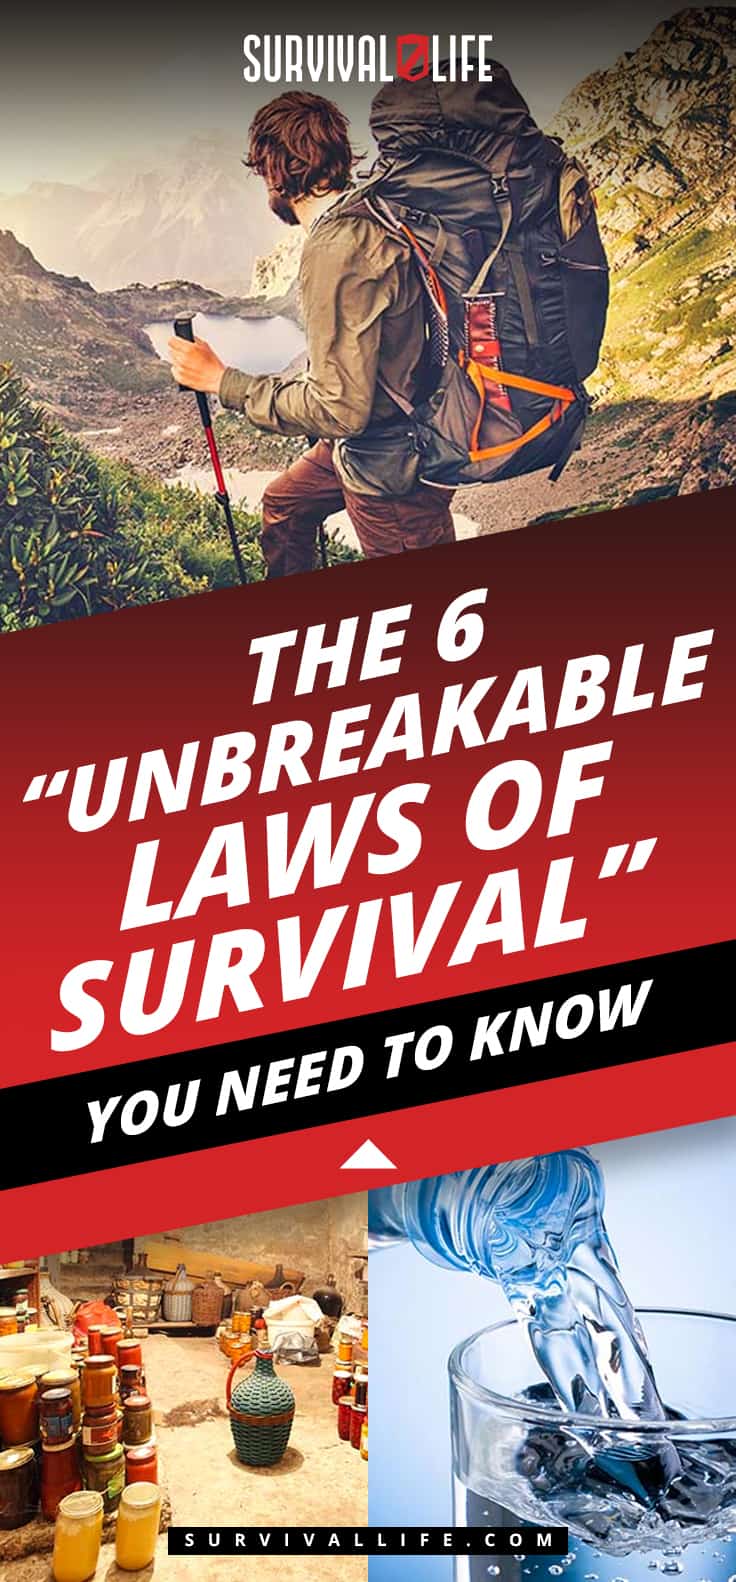 The 6 “Unbreakable Laws of Survival” You Need To Know